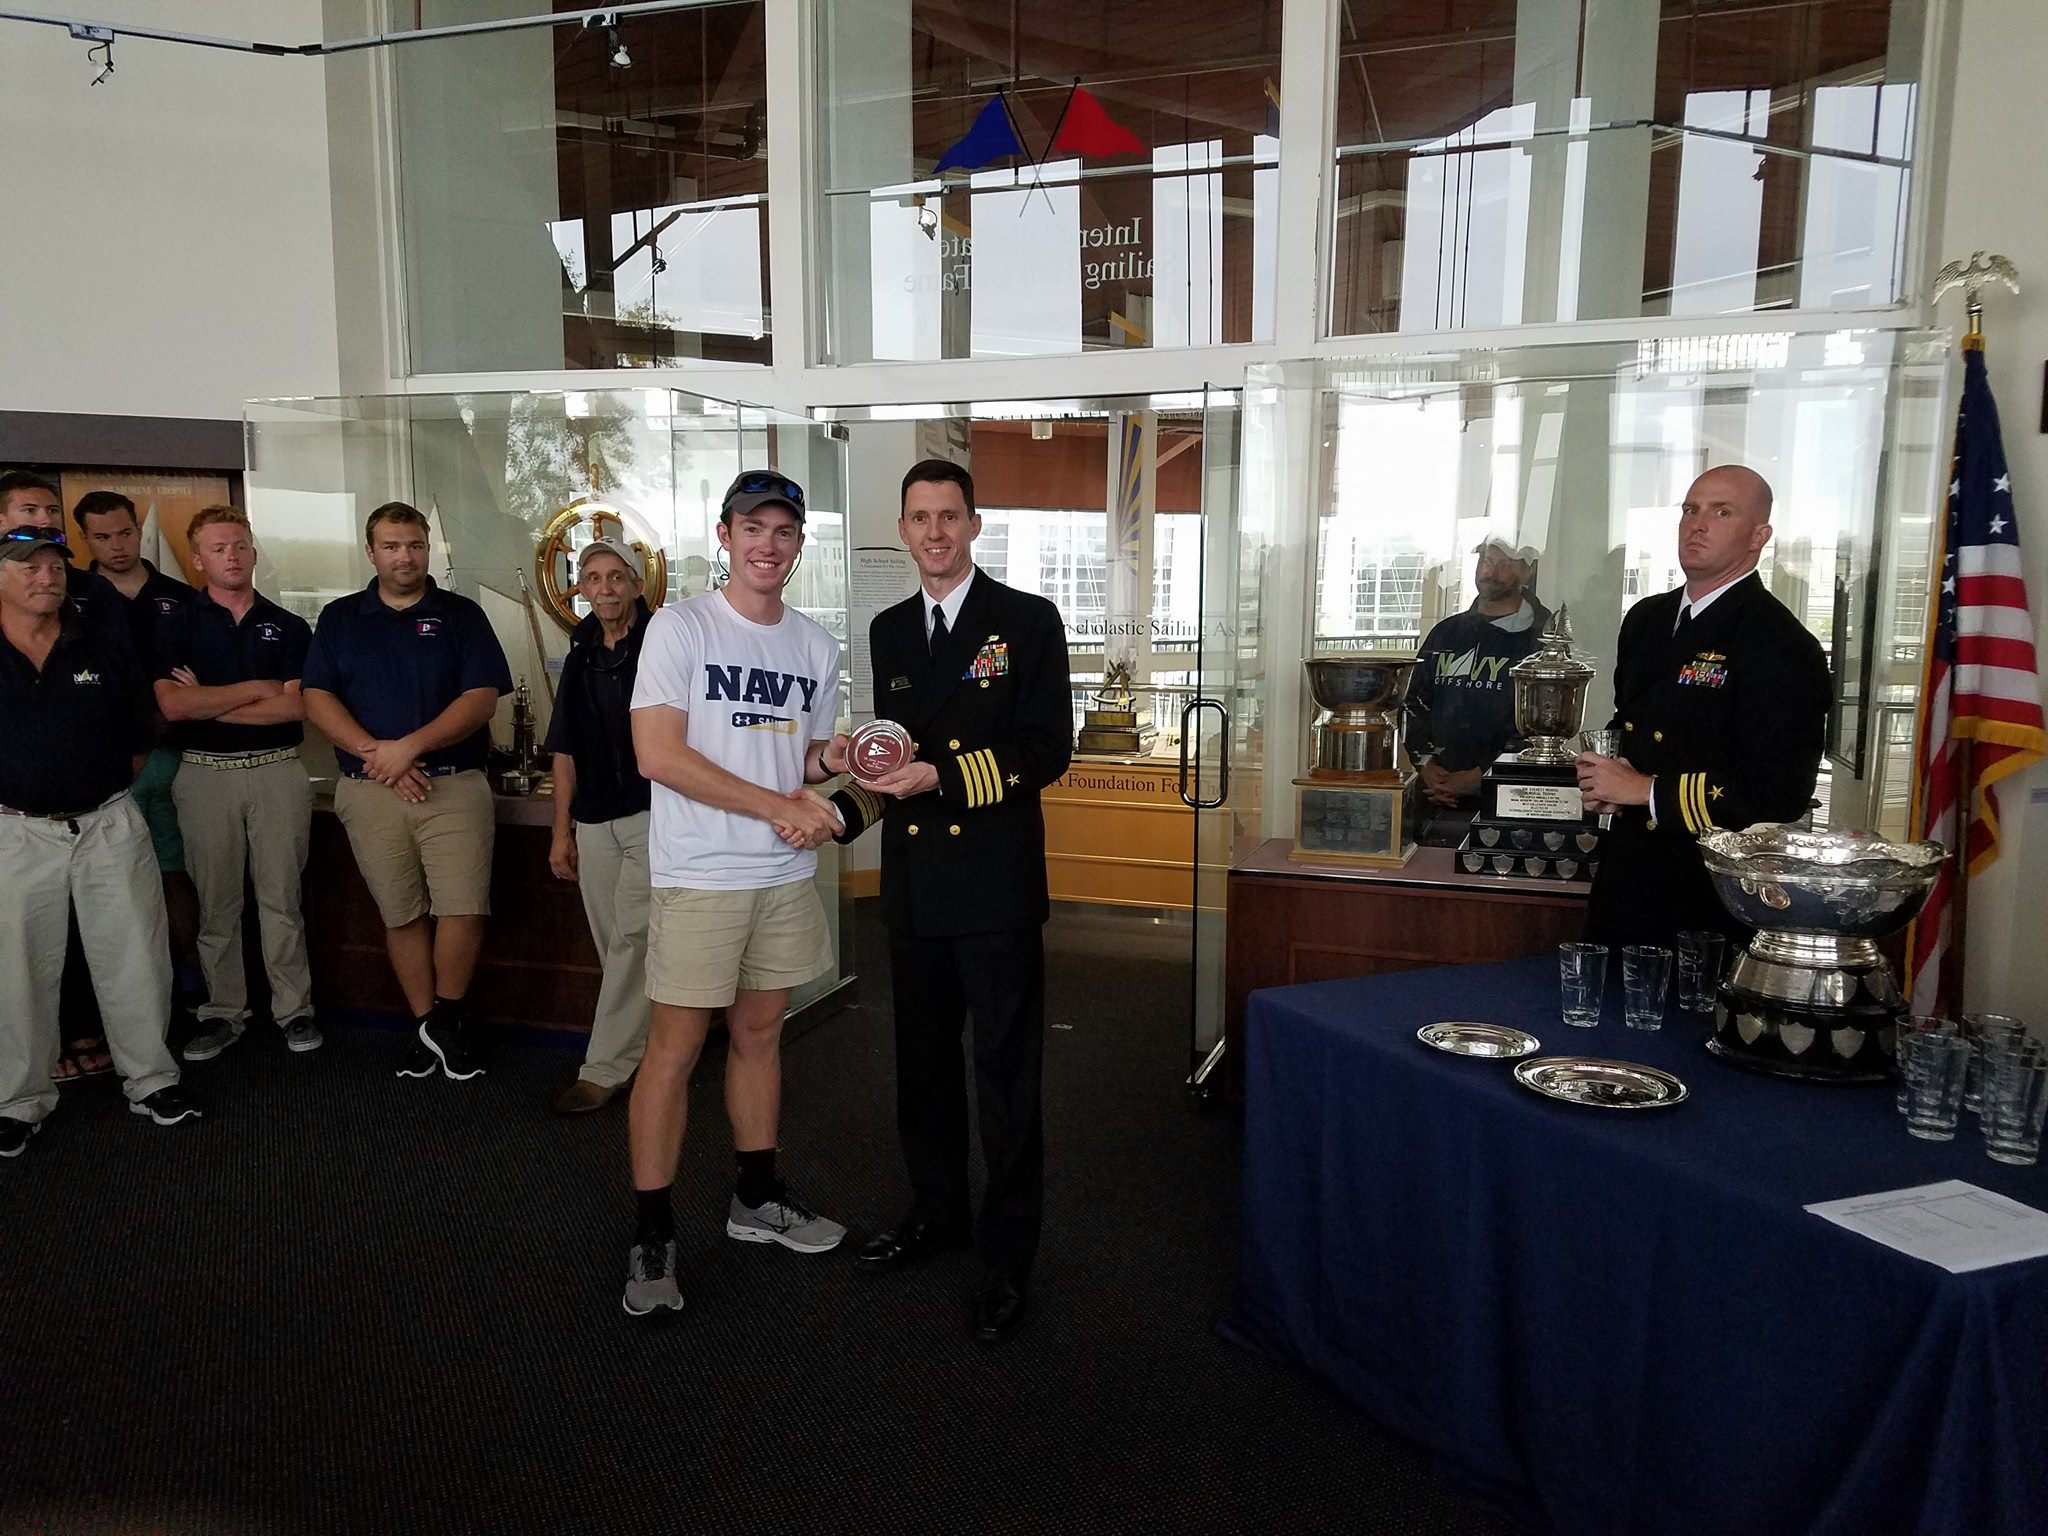 VOST Skipper Teddy Papenthien and his crew proudly represented USNA! Photo from USNA VOST Facebook page